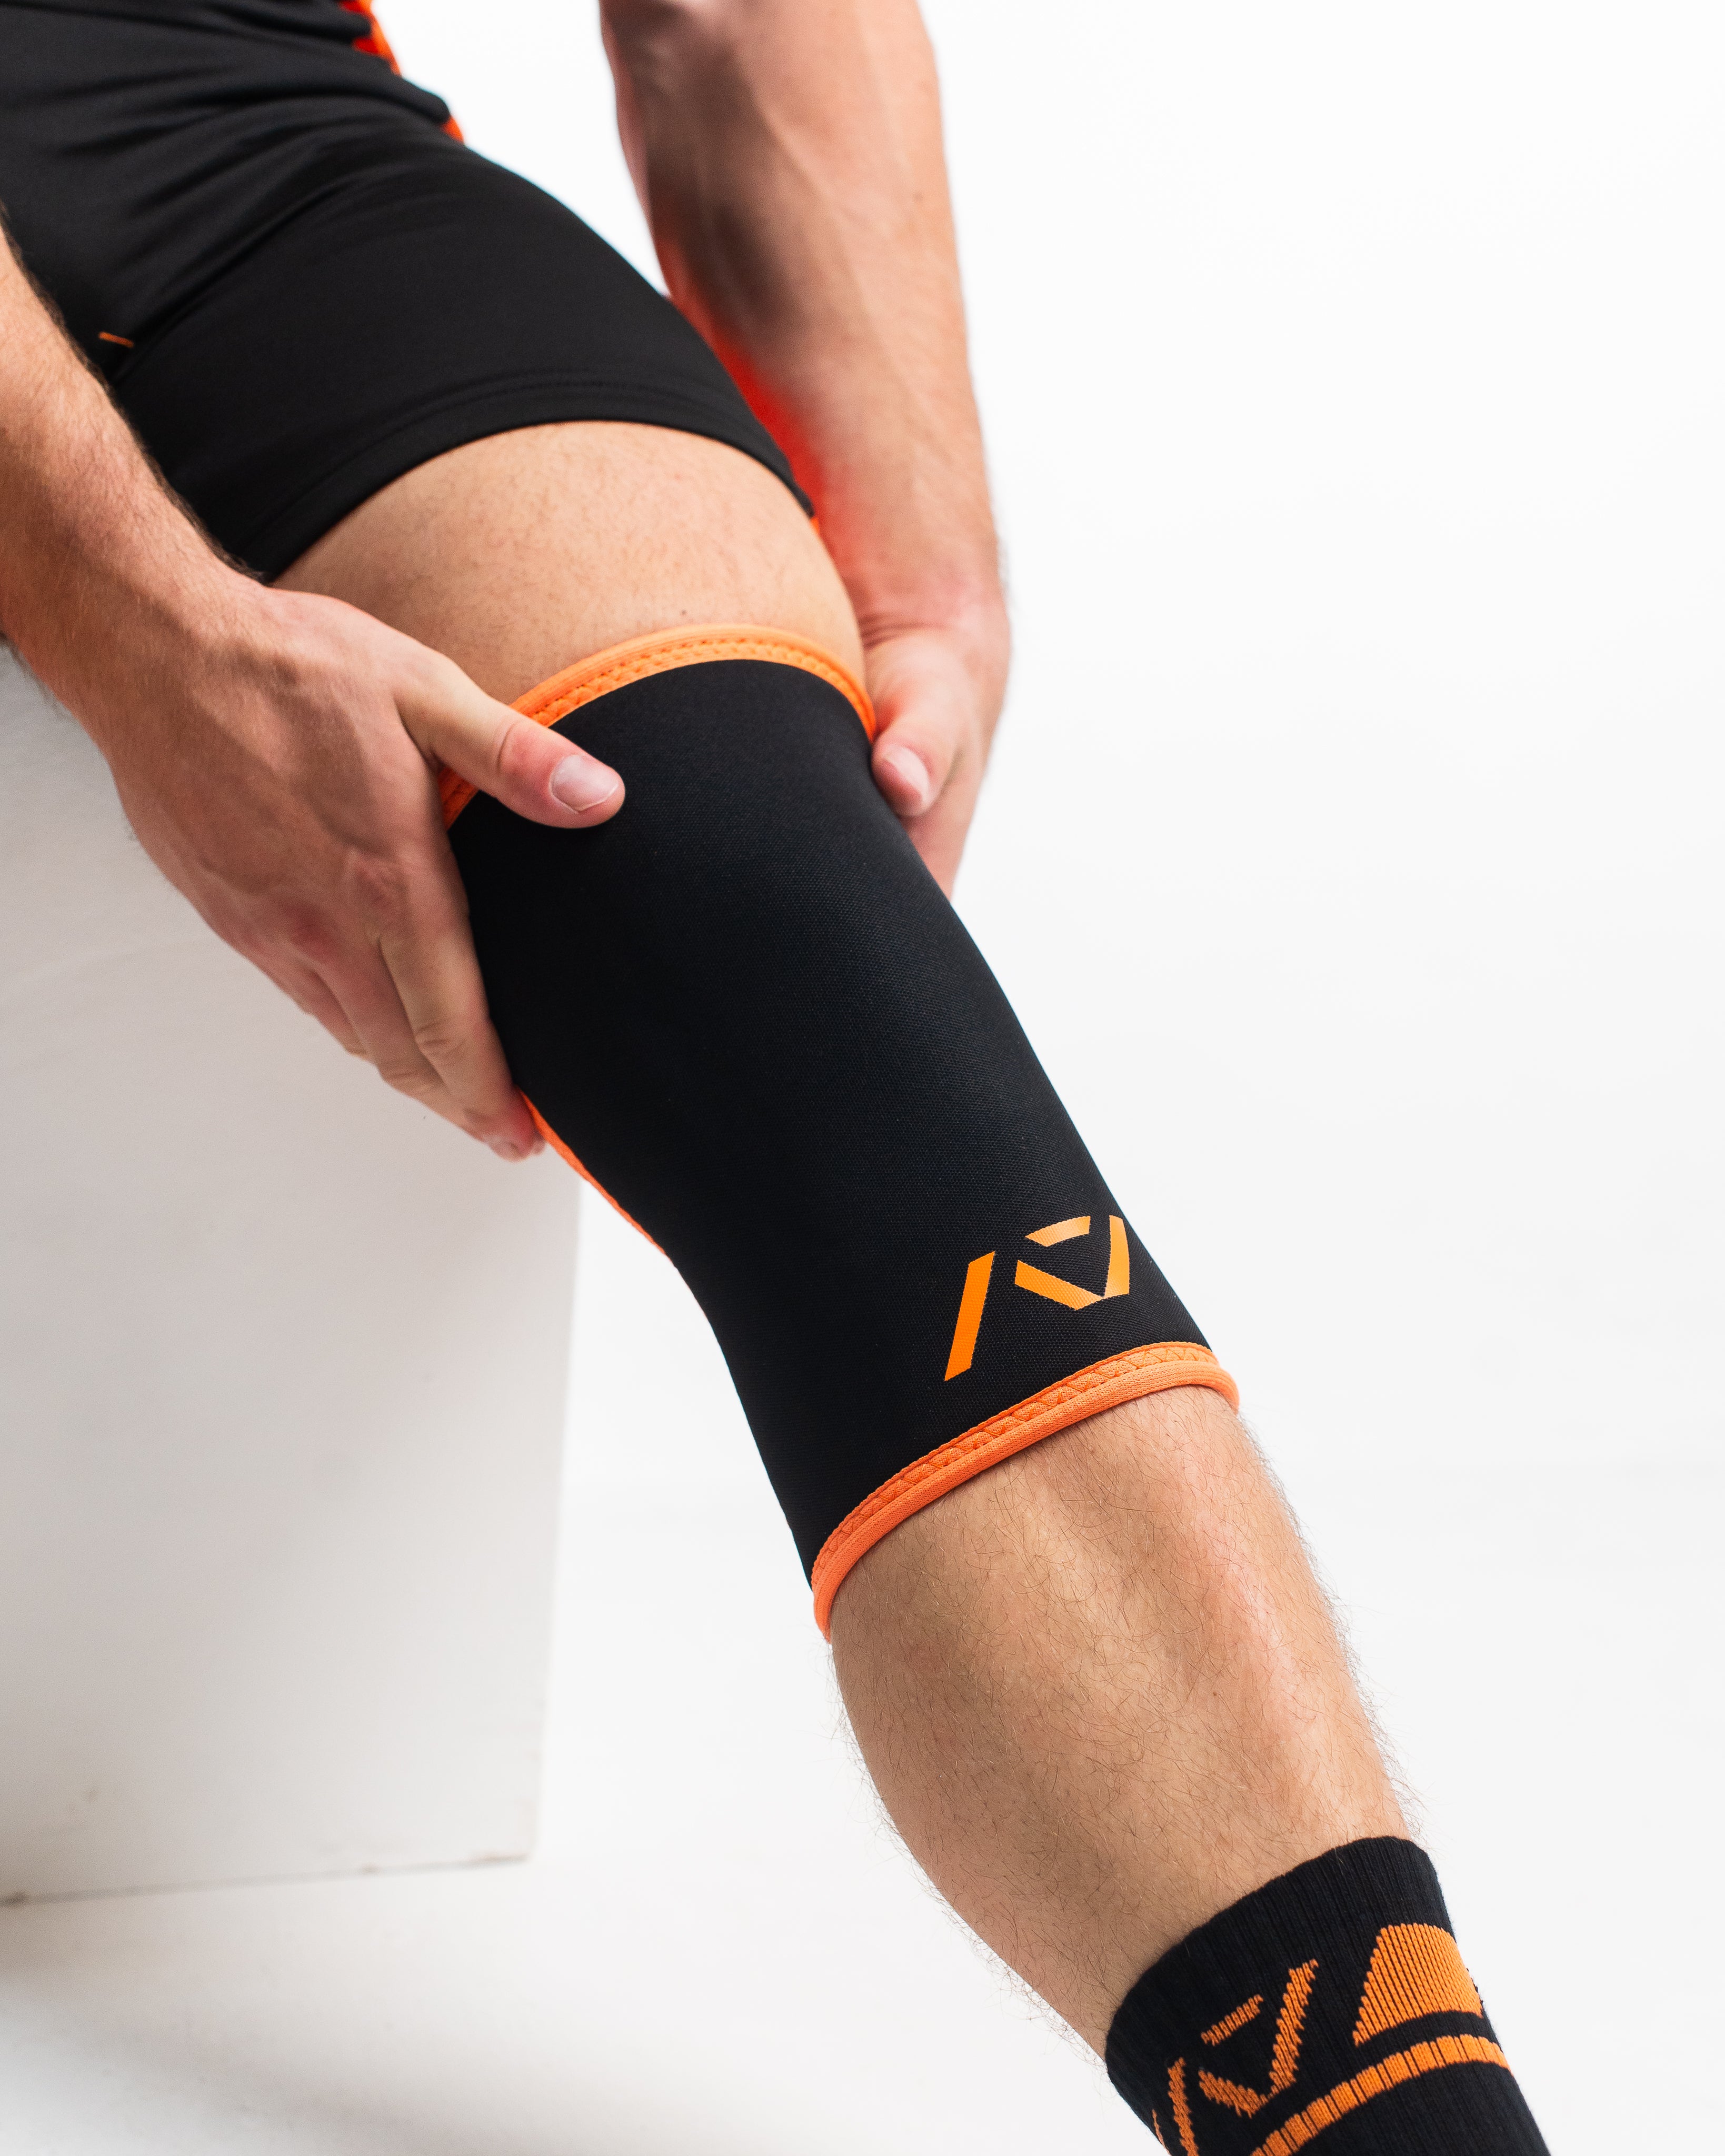 Black & Orange Knee Sleeves  Knee Support Sleeves for Squats – A7